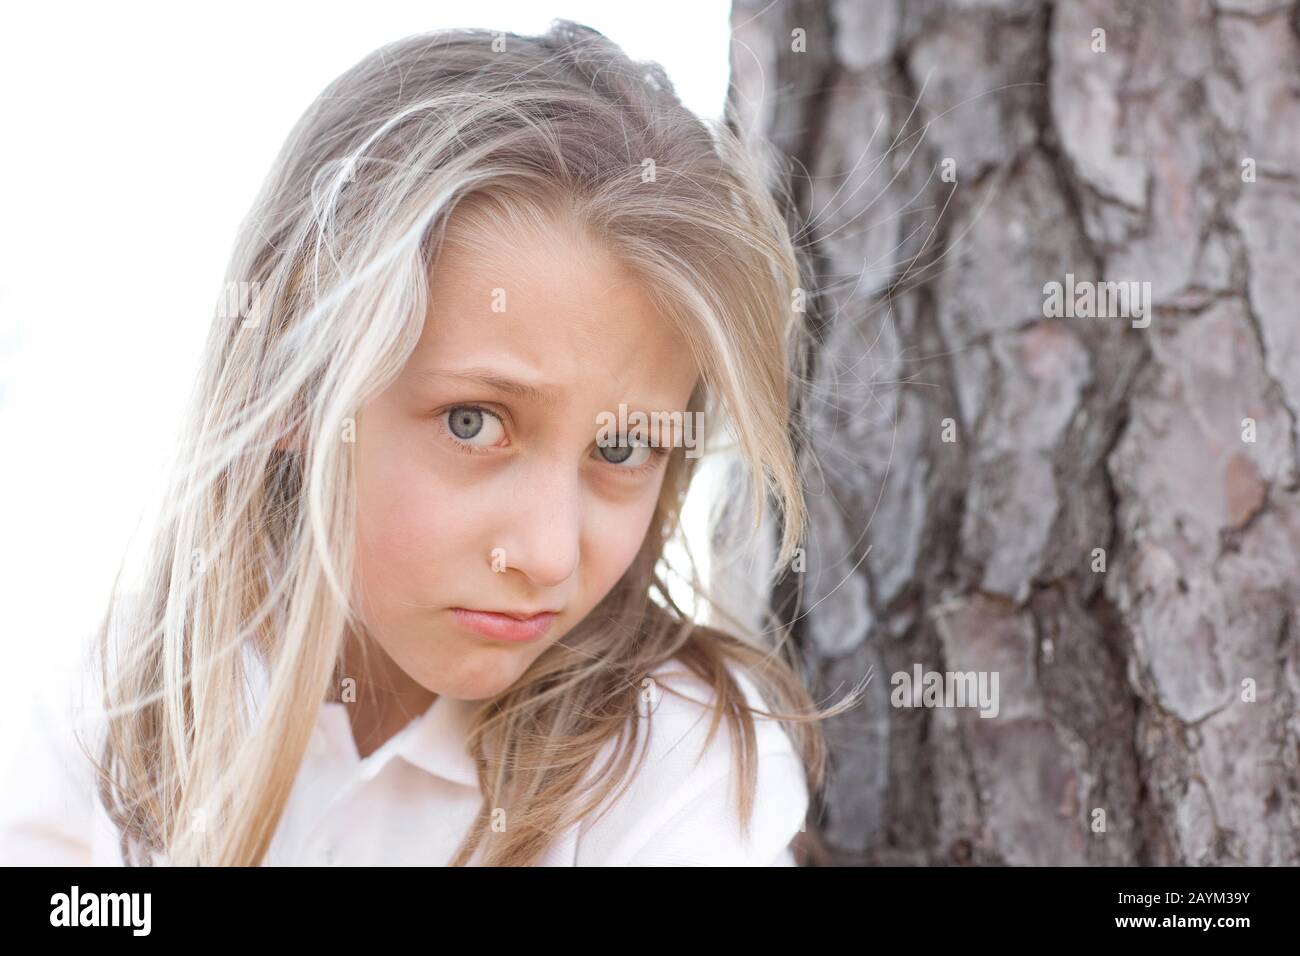 A cute young girl with messed up blond hair and blue eyes, and a half funny, half serious expression on her face, standing next to an old pine tree. W Stock Photo